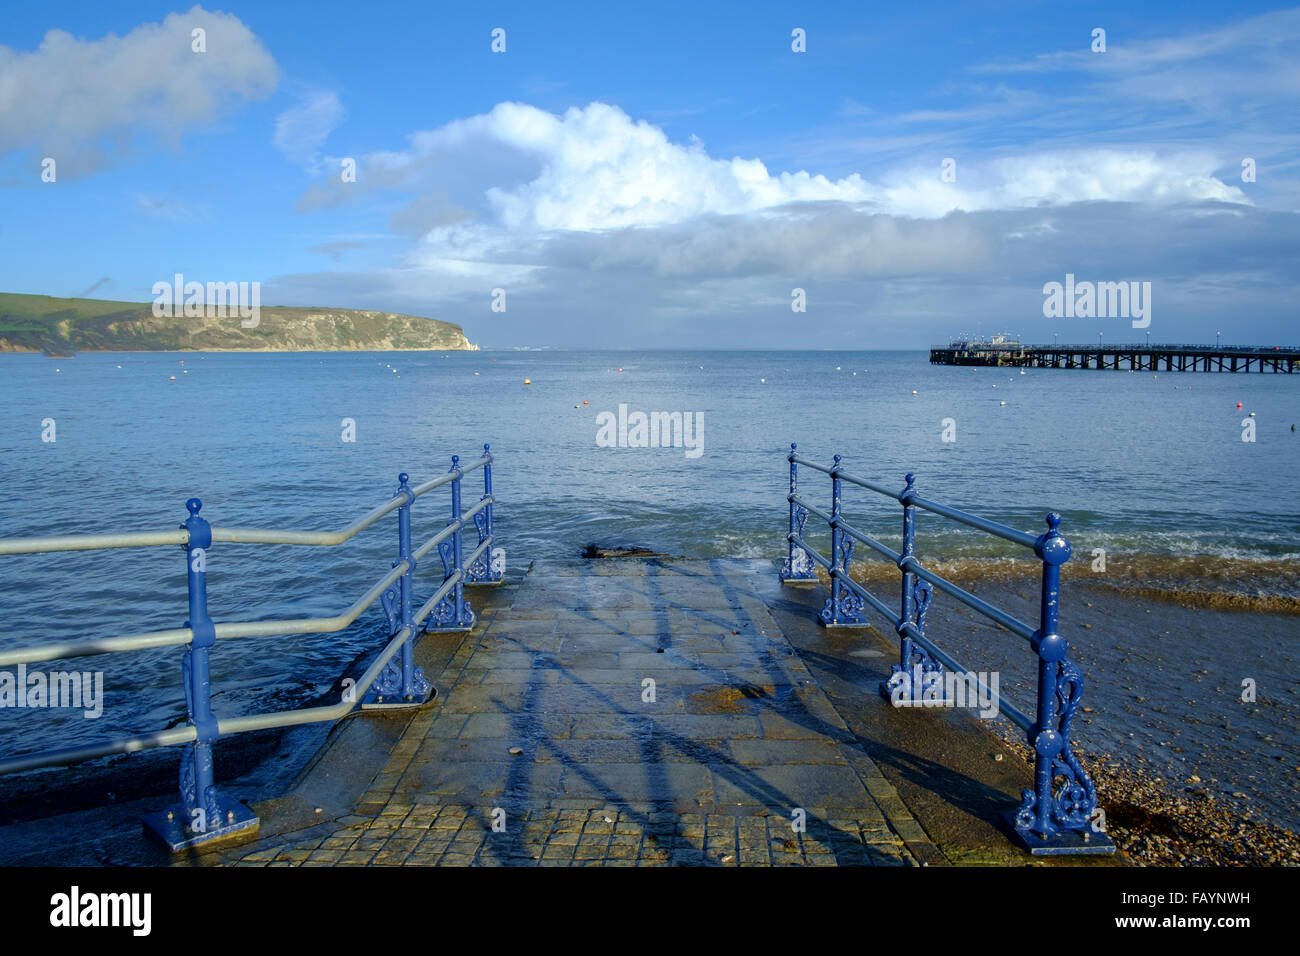 Swanage is a coastal town and civil parish in the south east of Dorset, England. It is situated at the eastern end of the Isle of Purbeck, Stock Photo